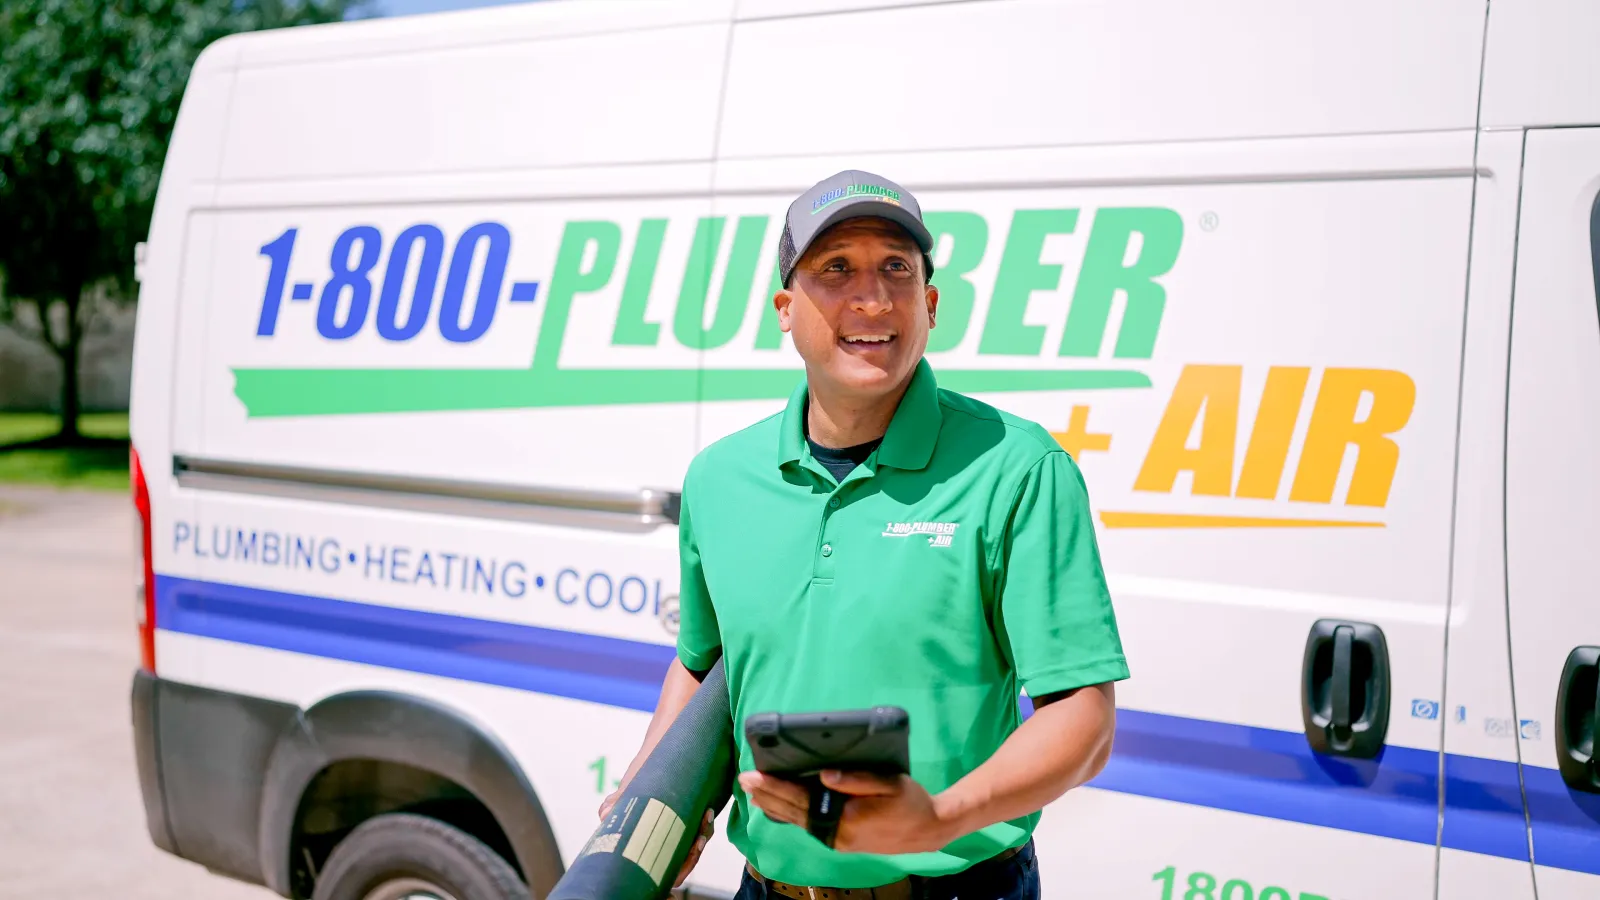 a Houston plumber and a 1-800-Plumber +Air van